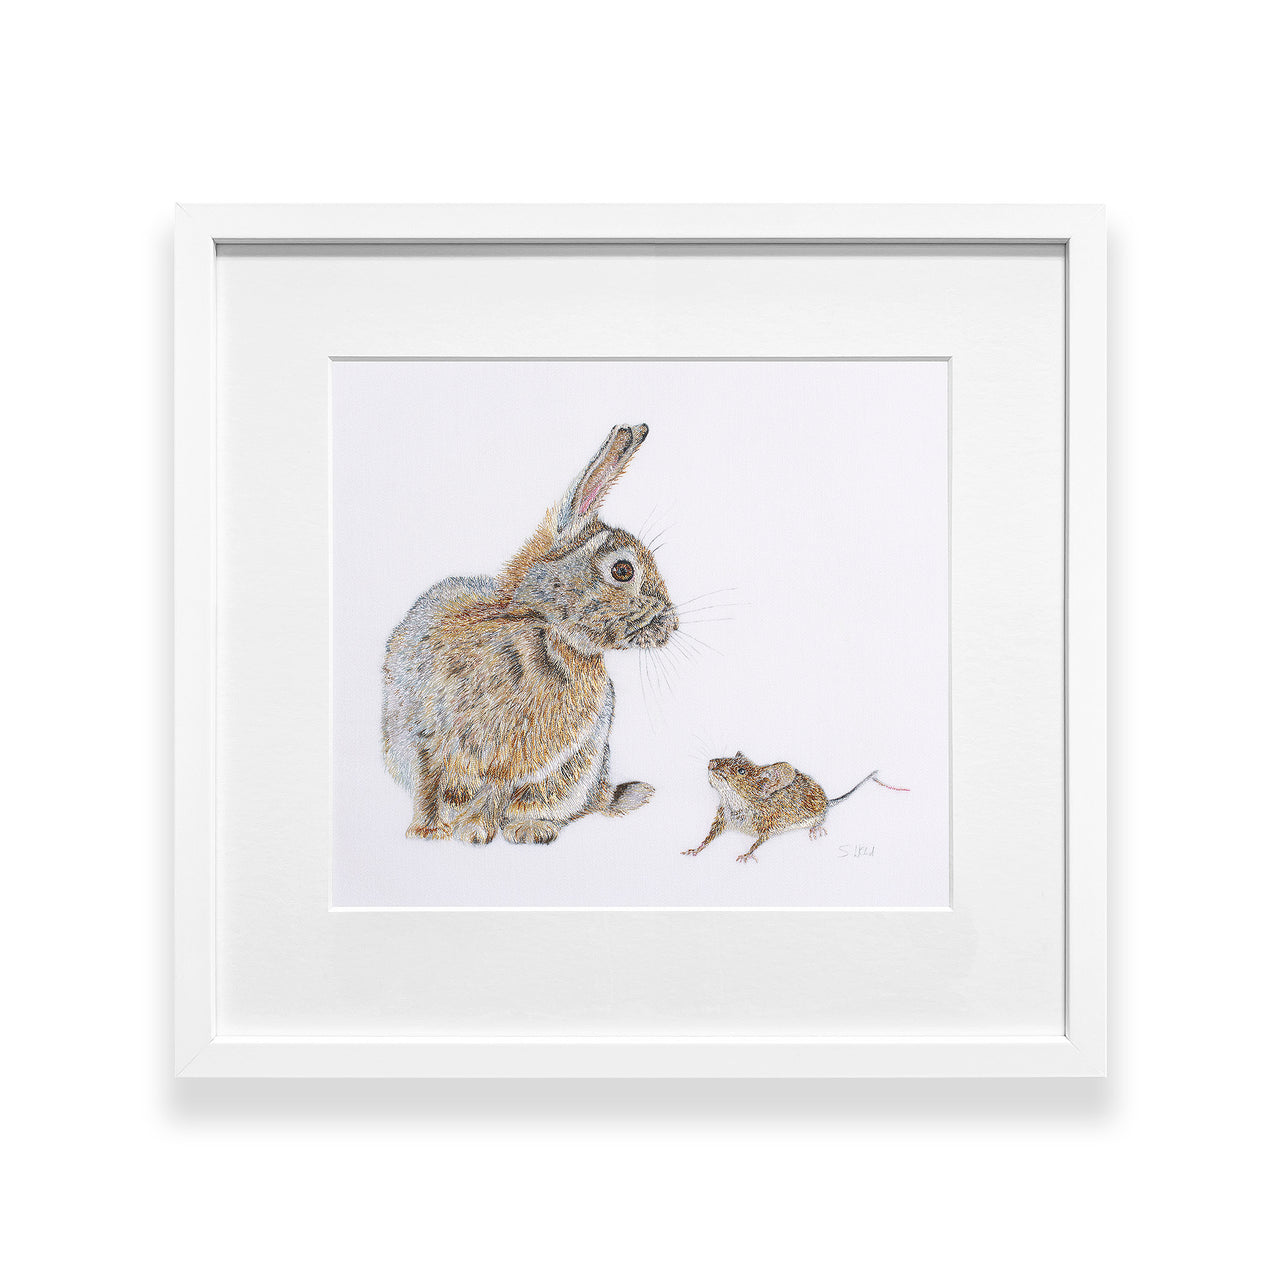 Rabbit & Mouse hand embroidered artwork in a white frame